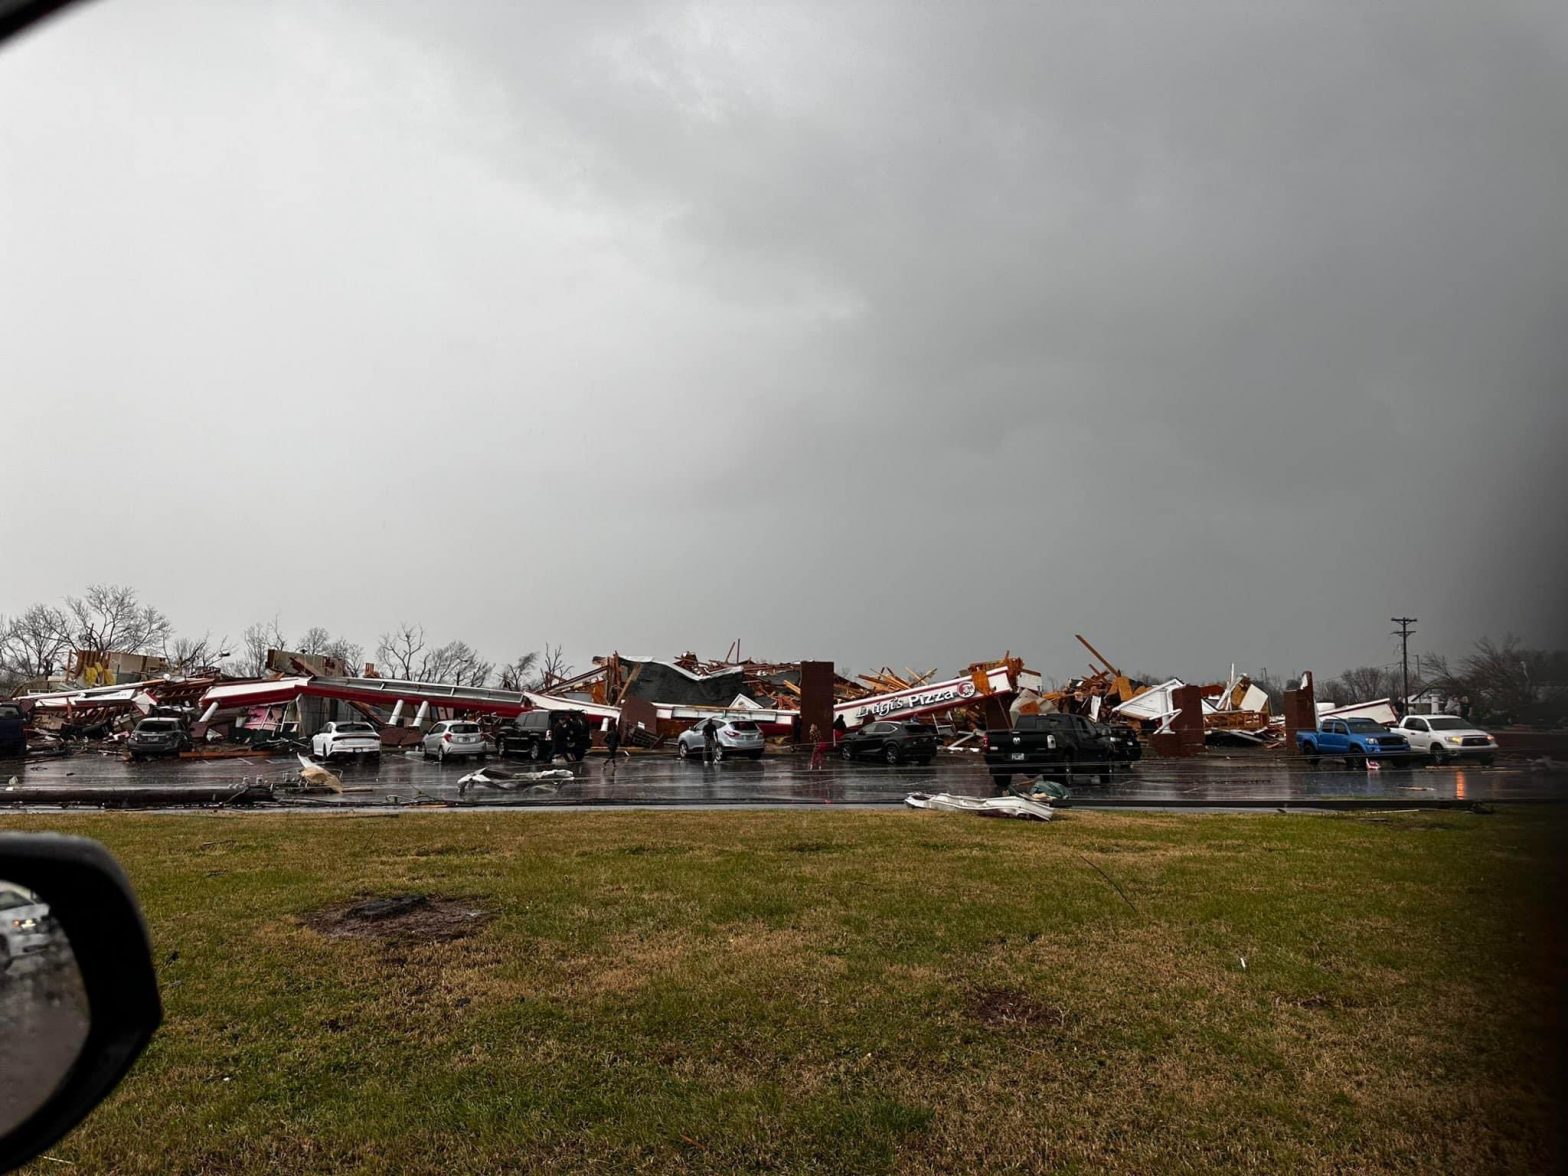 Luigi’s Pizza and other structures destroyed in tornado in Clarksville, Tennessee| Watch Video